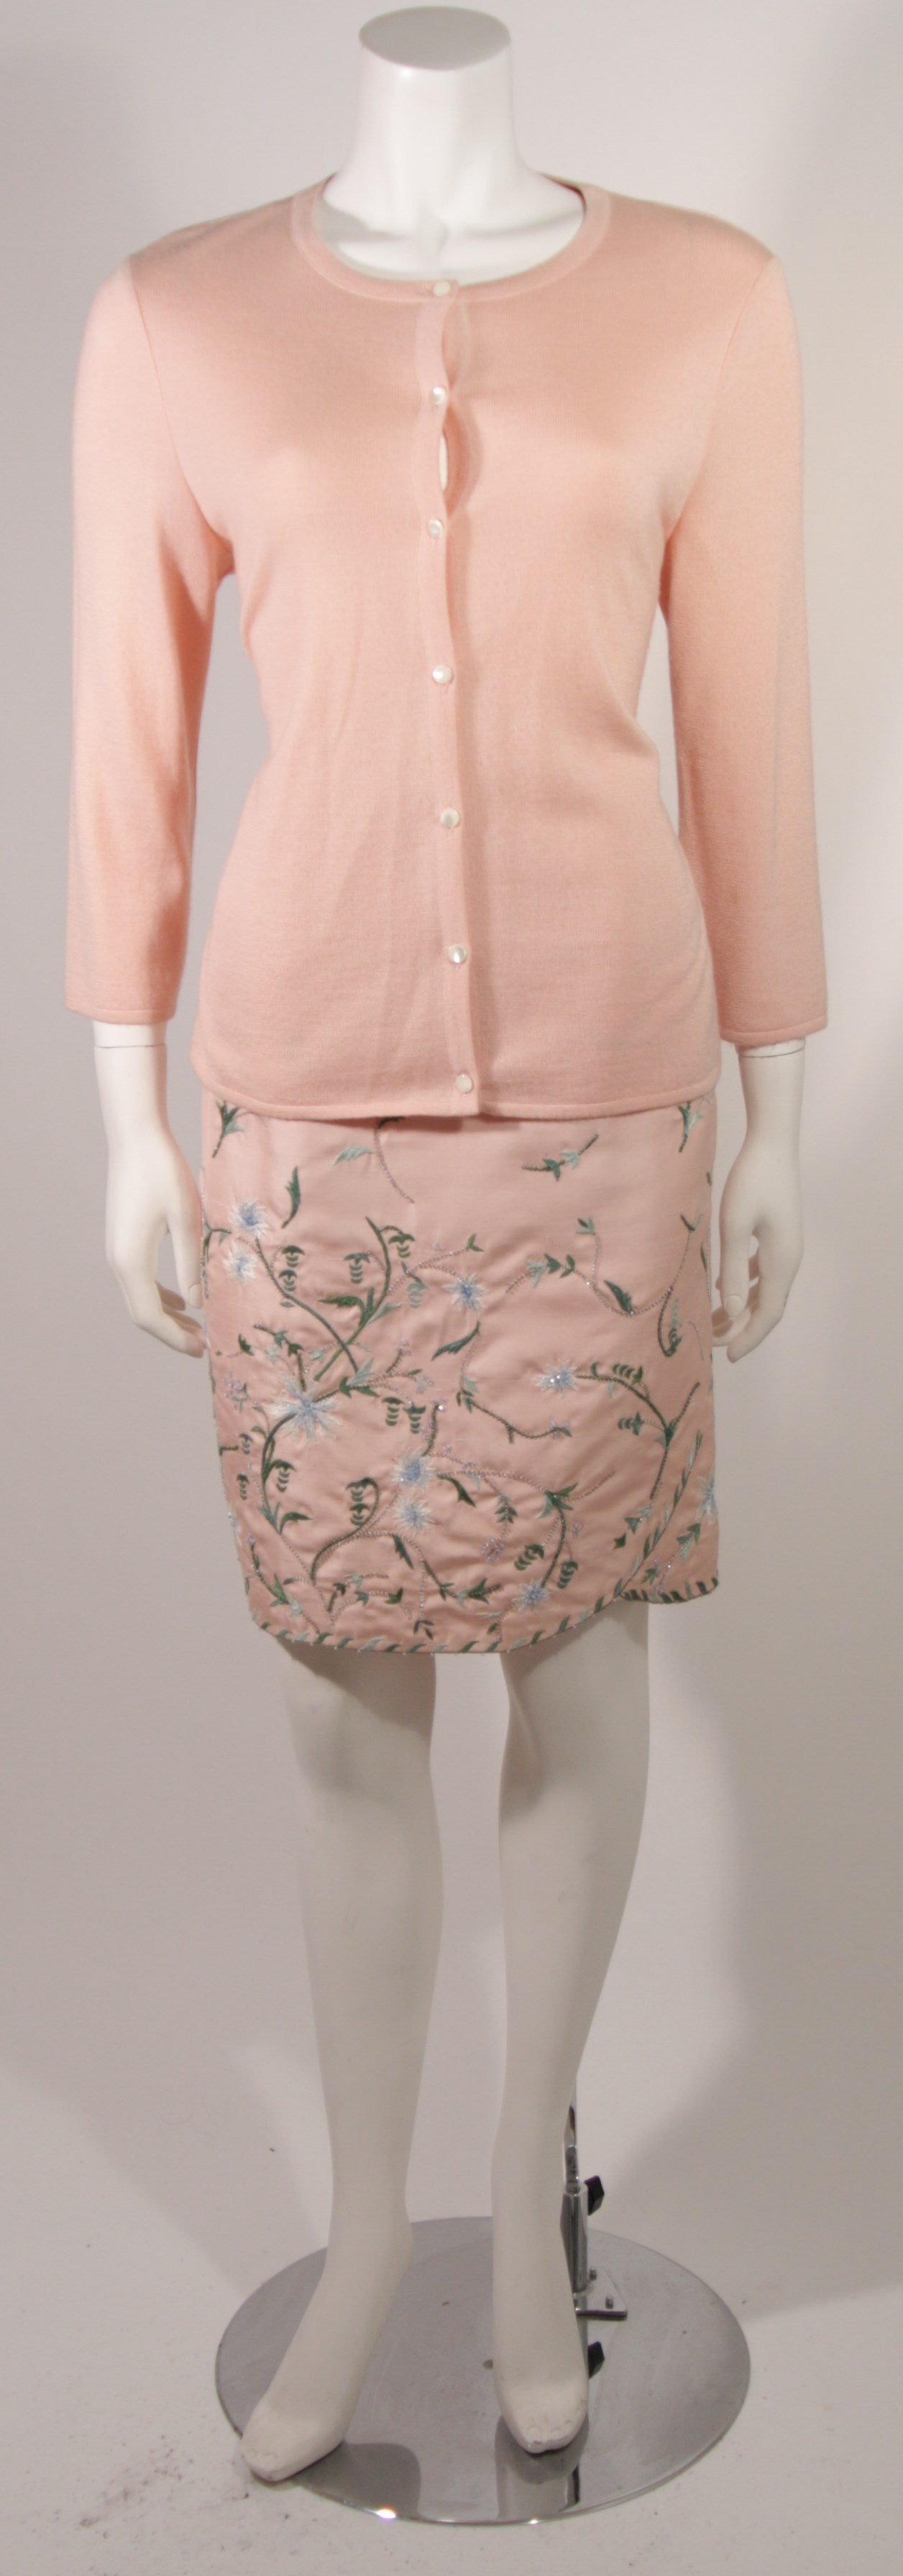 This is an Oscar De La Renta design. This set features a beautiful supple pink cardigan and embroidered skirt. The skirt is composed of a silk/wool blend and is embroidered with a floral motif and accented with a flash of bead work. The skirt